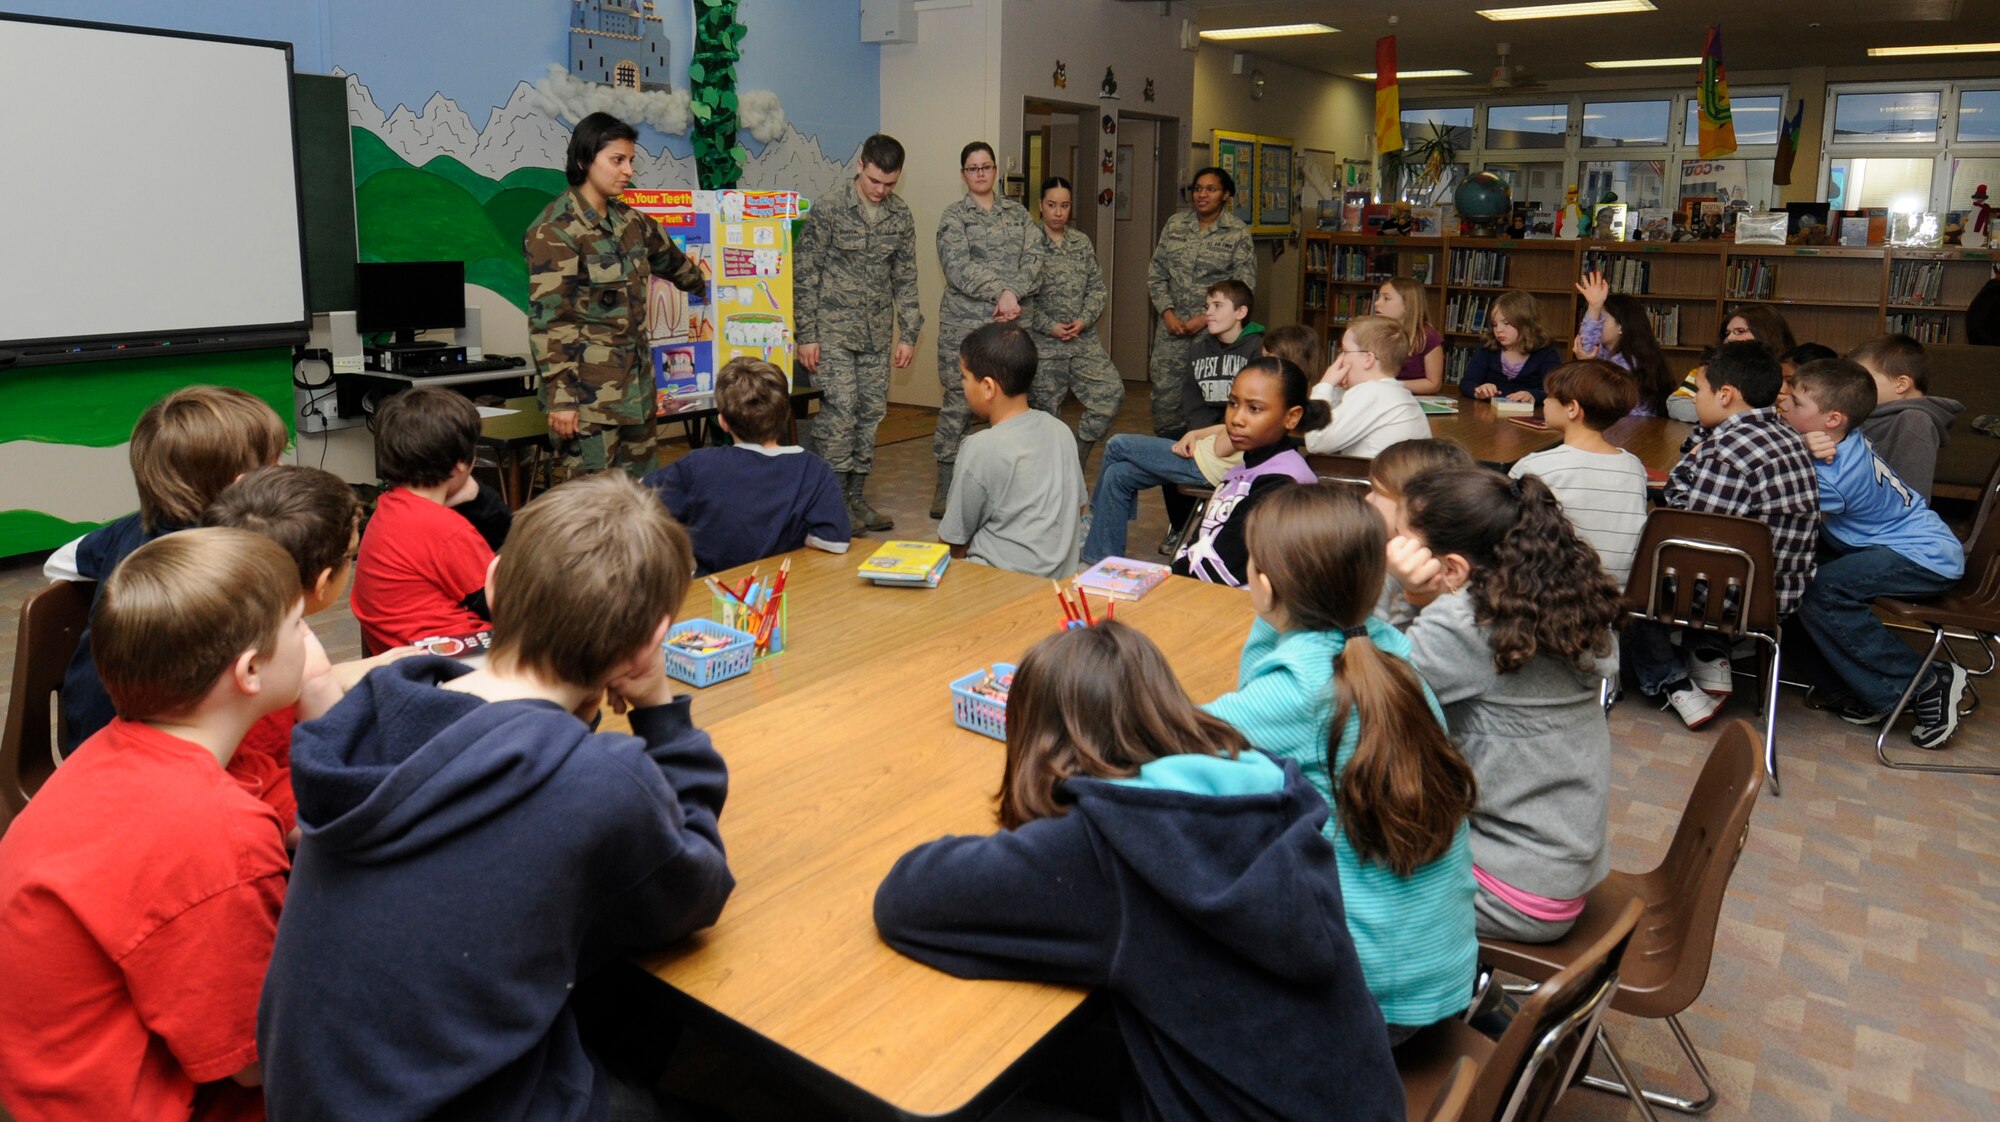 SPANGDAHLEM AIR BASE, Germany –Representatives from the 52nd Dental Squadron teach a fourth grade class the proper brushing and flossing techniques, tooth anatomy, the importance of fluoride and the dangers of smoking Feb. 9 at the Bitburg Elementary School. Each February, the American Dental Association sponsors National Children’s Dental Health Month. In addition to visiting elementary and middle schools, the 52nd DS is opening the Spangdahlem Dental Clinic Feb. 27 to offer walk-ins for children up to 10 years of age. (U.S. Air Force photo/Airman 1st Class Staci Miller)